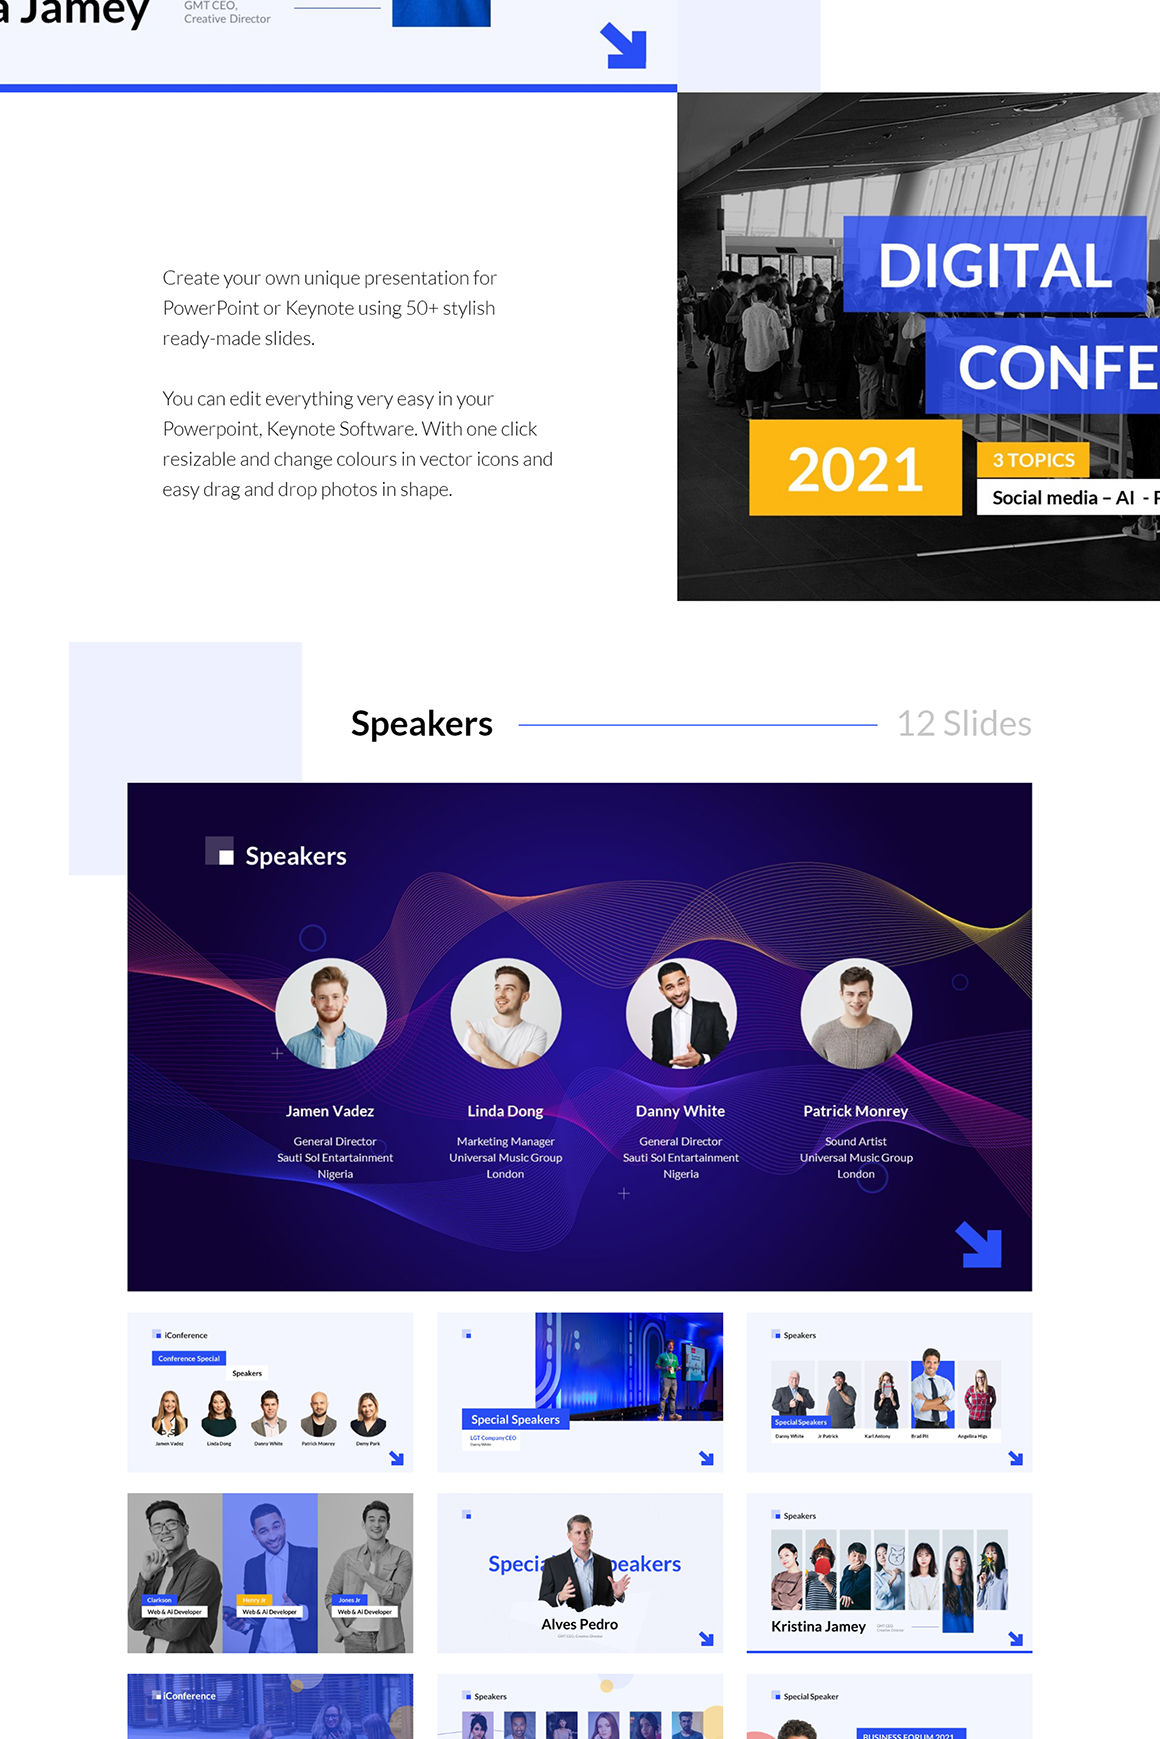 iConference - Animated Presentation Template